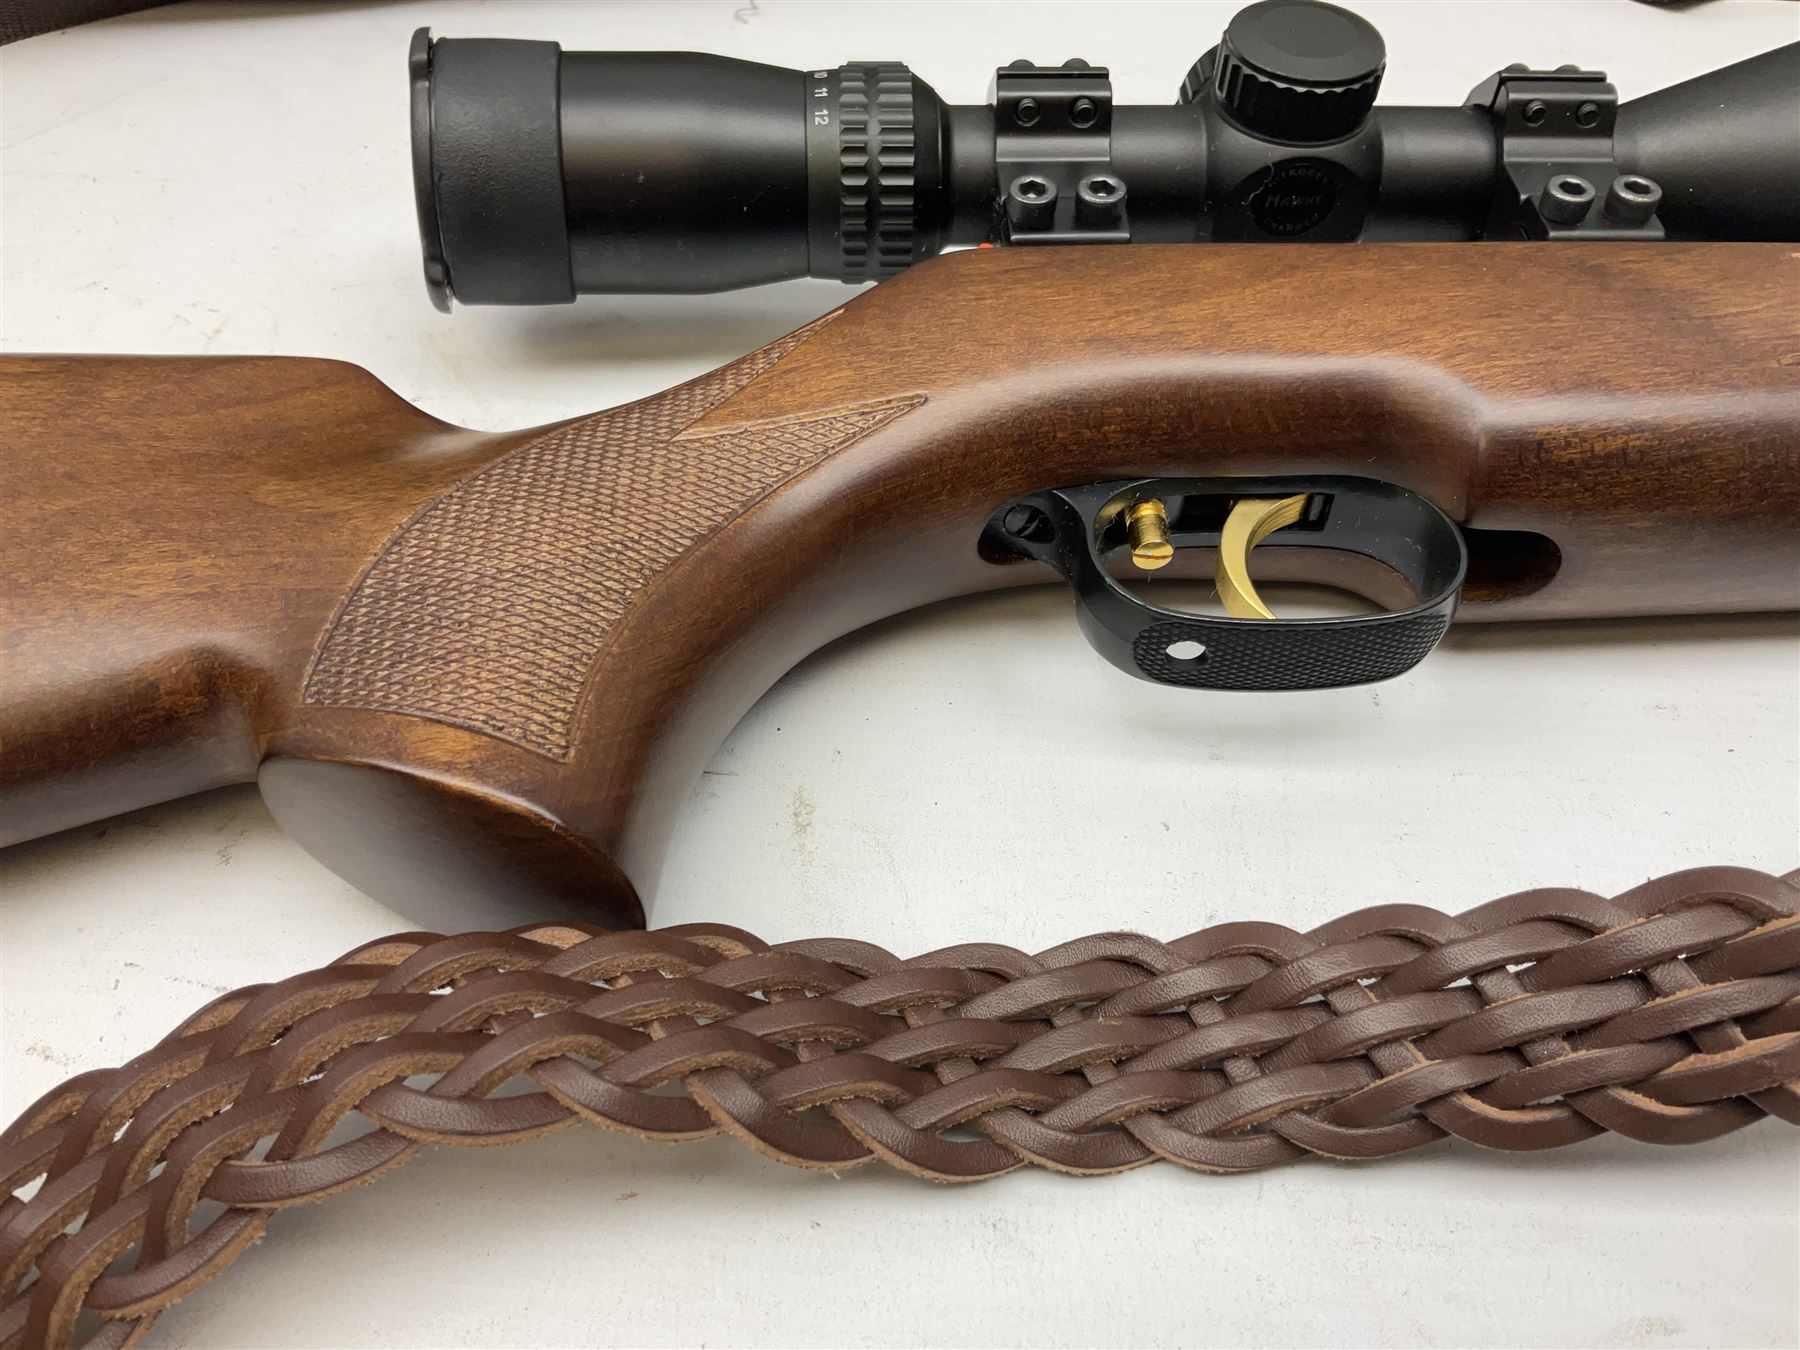 Weihrauch HW95 .177 air rifle with break barrel action - Image 5 of 24